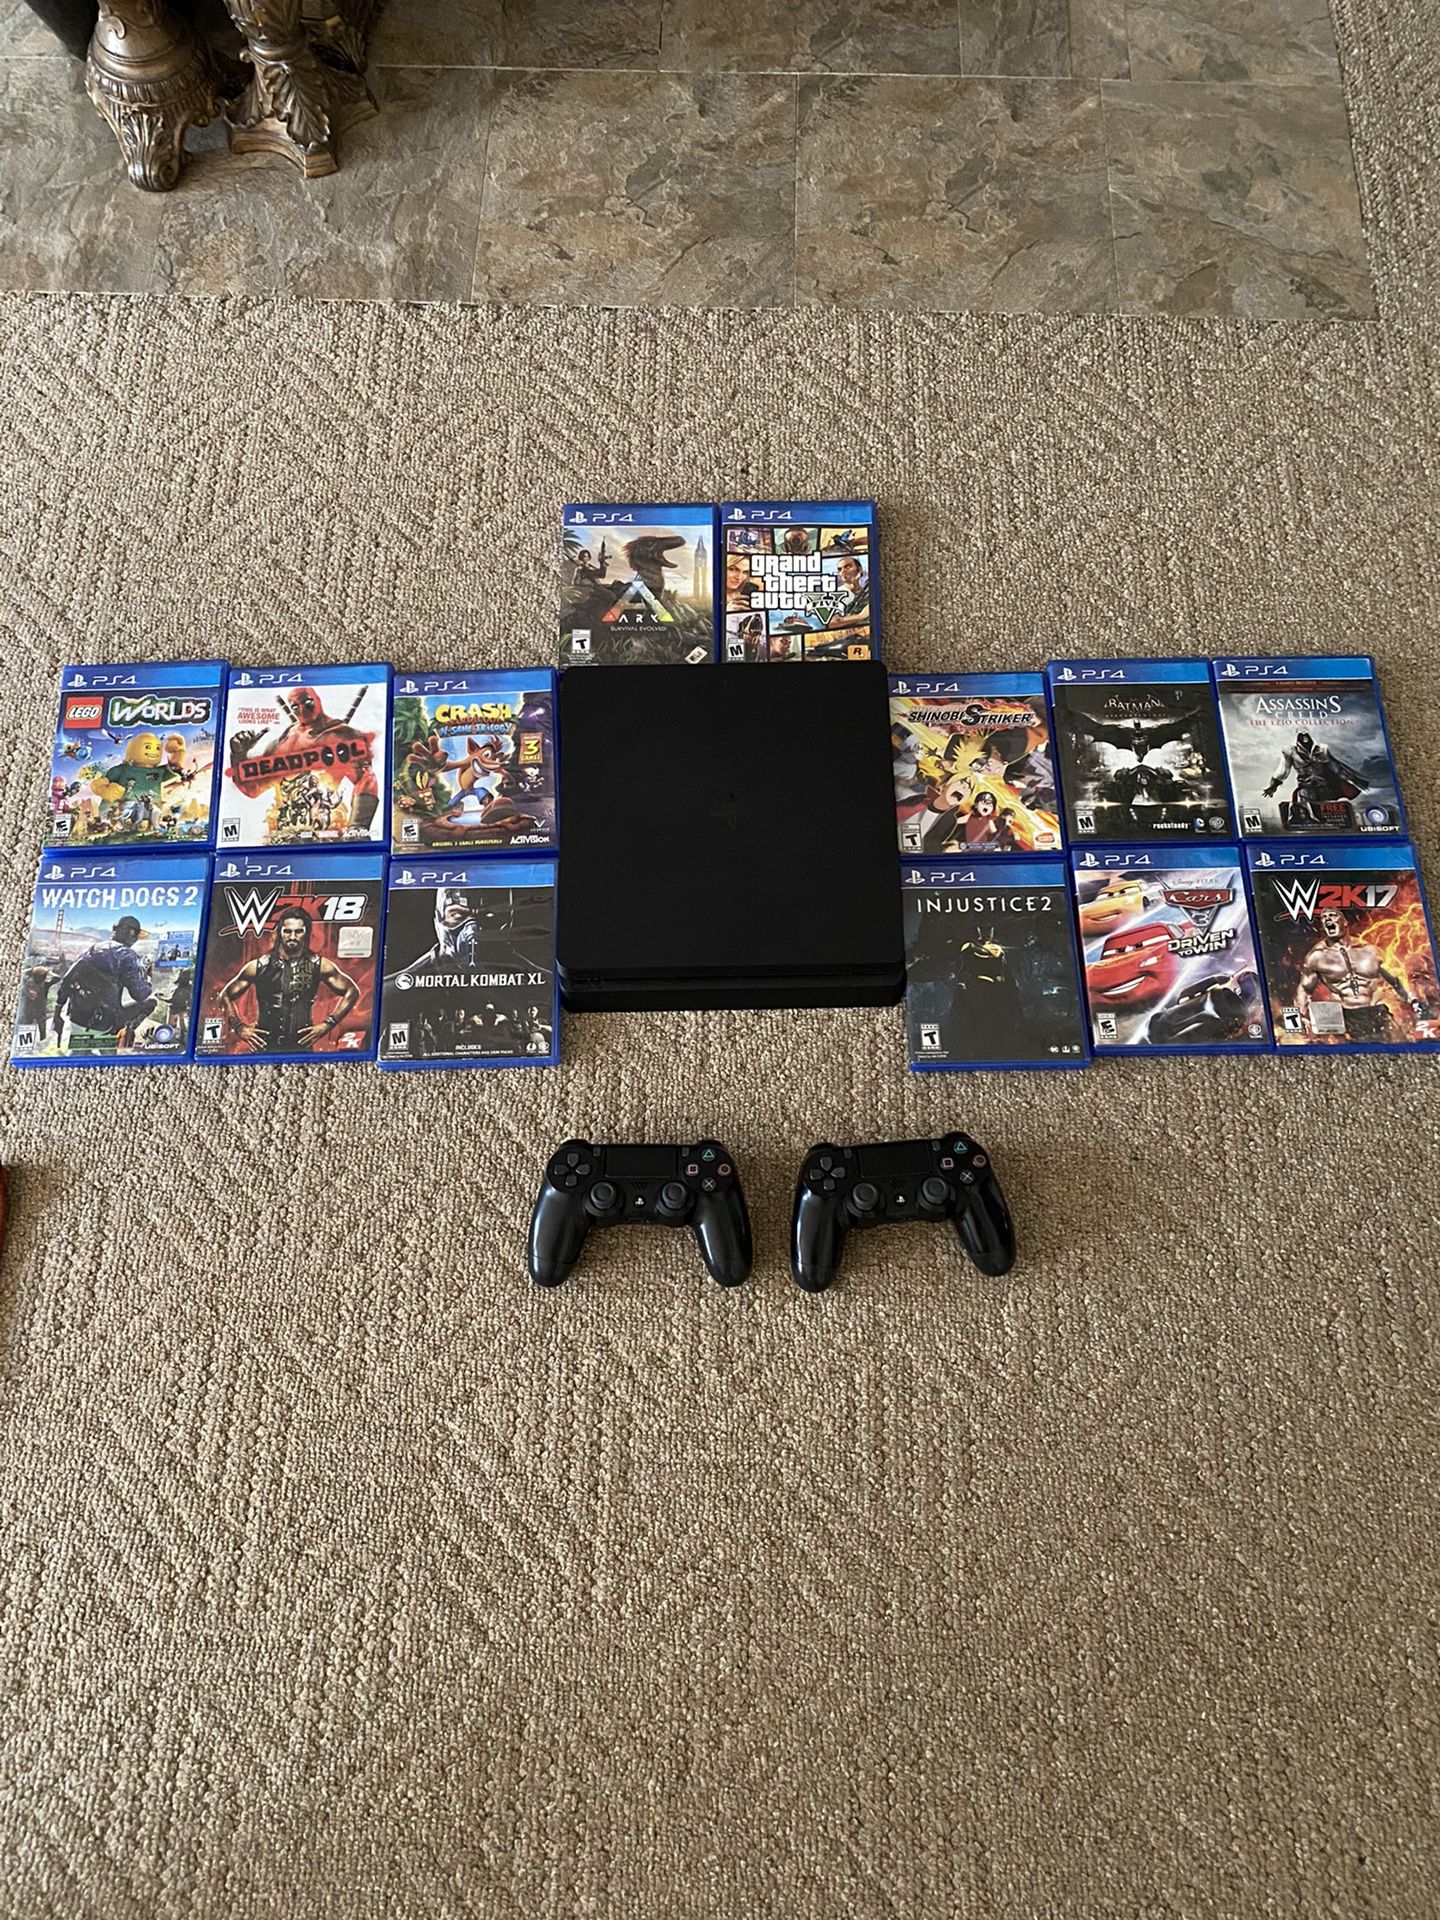 PS4 with 14 games and 2 controllers